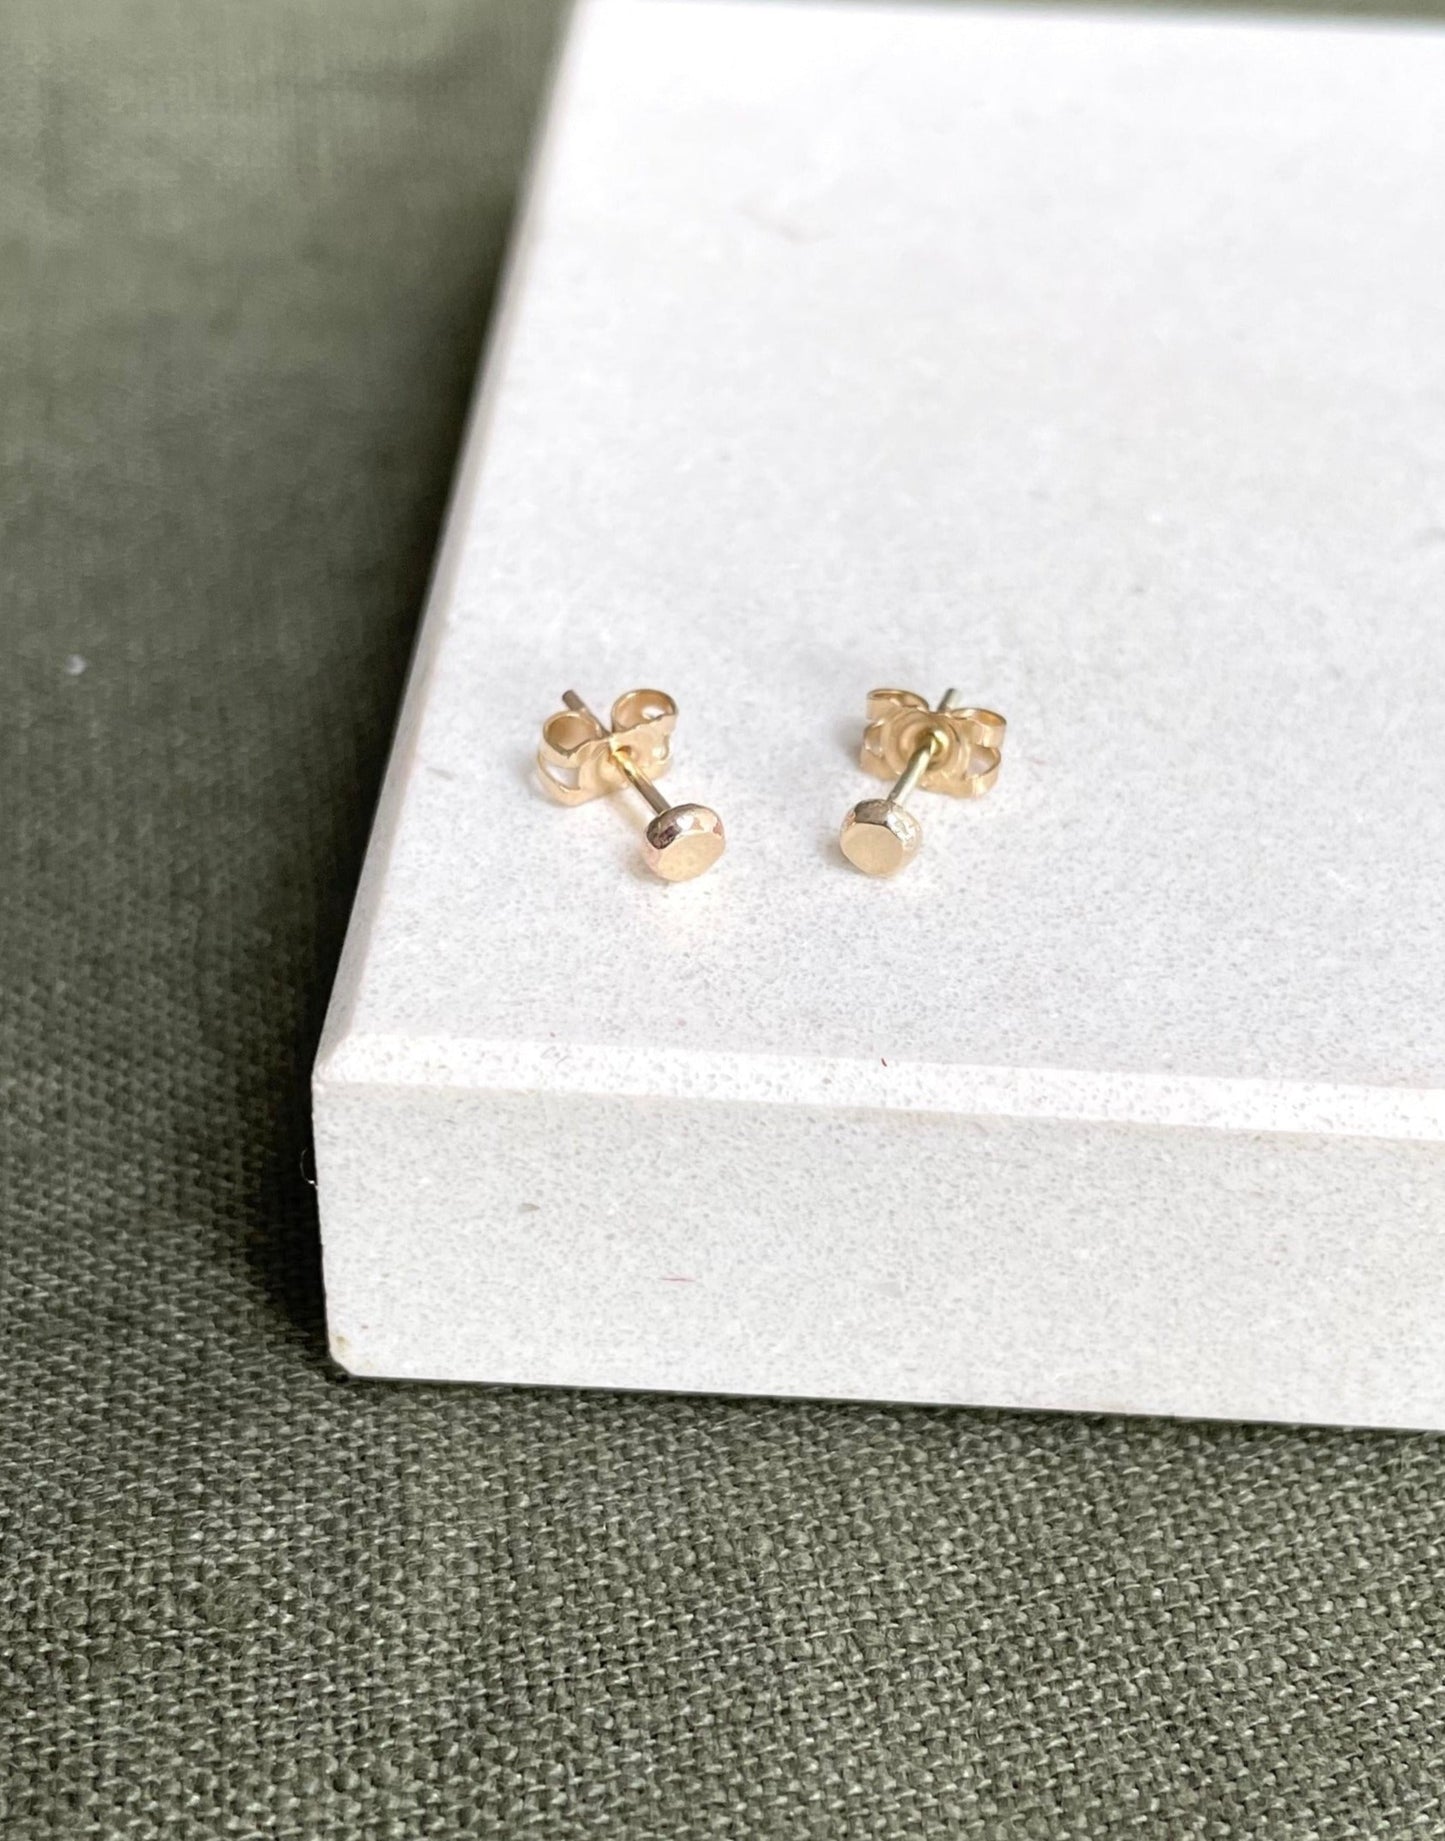 Simple 9ct Gold studs with a polished finish